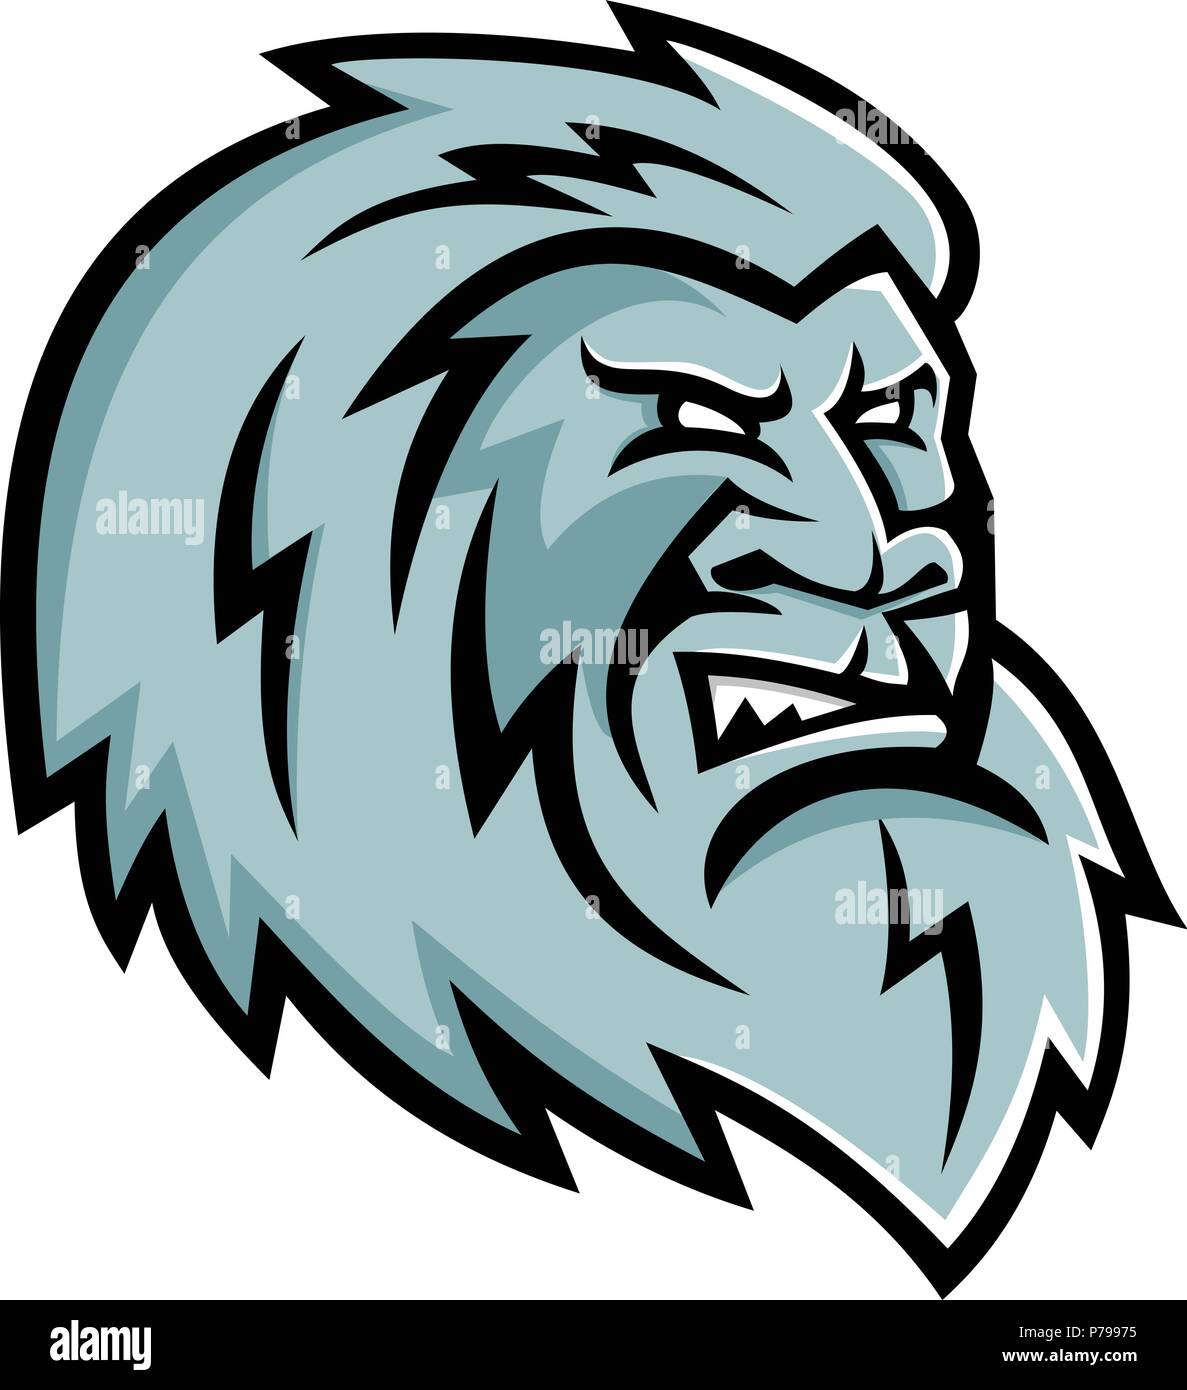 Mascot icon illustration of head of a Yeti or Abominable Snowman, an ape-like entity, mythical or legendary creature in the folklore of Nepal viewed f Stock Vector